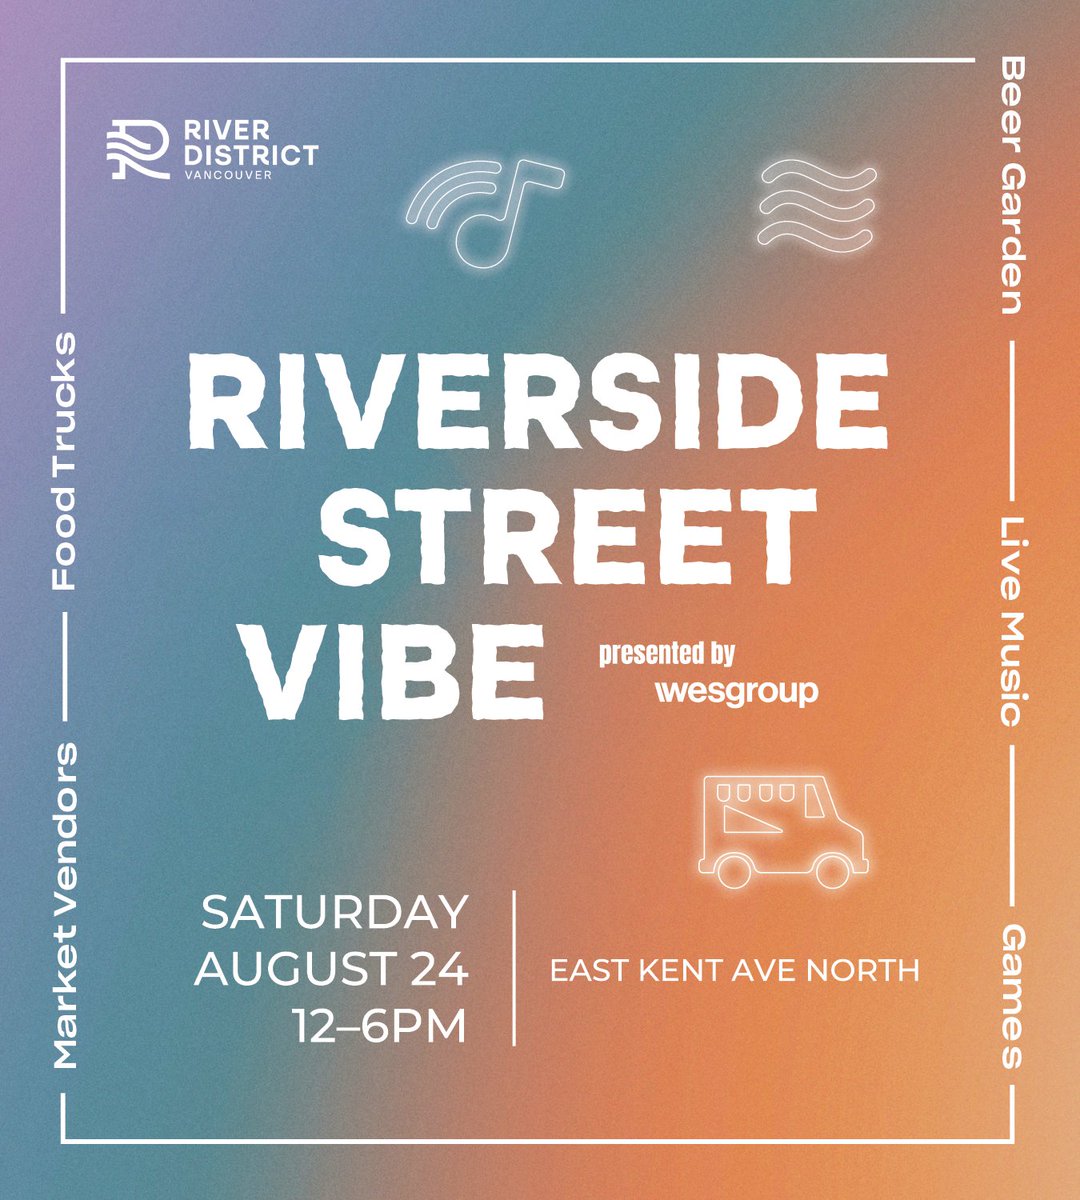 Get ready for our 3rd annual Riverside Street Vibe Festival on Saturday, August 24th from 12-6 pm! ☀️🎉 We’re looking for vendors to join us in making this year’s event a memorable one for our community. Fill out our vendor application form at the link in our bio!